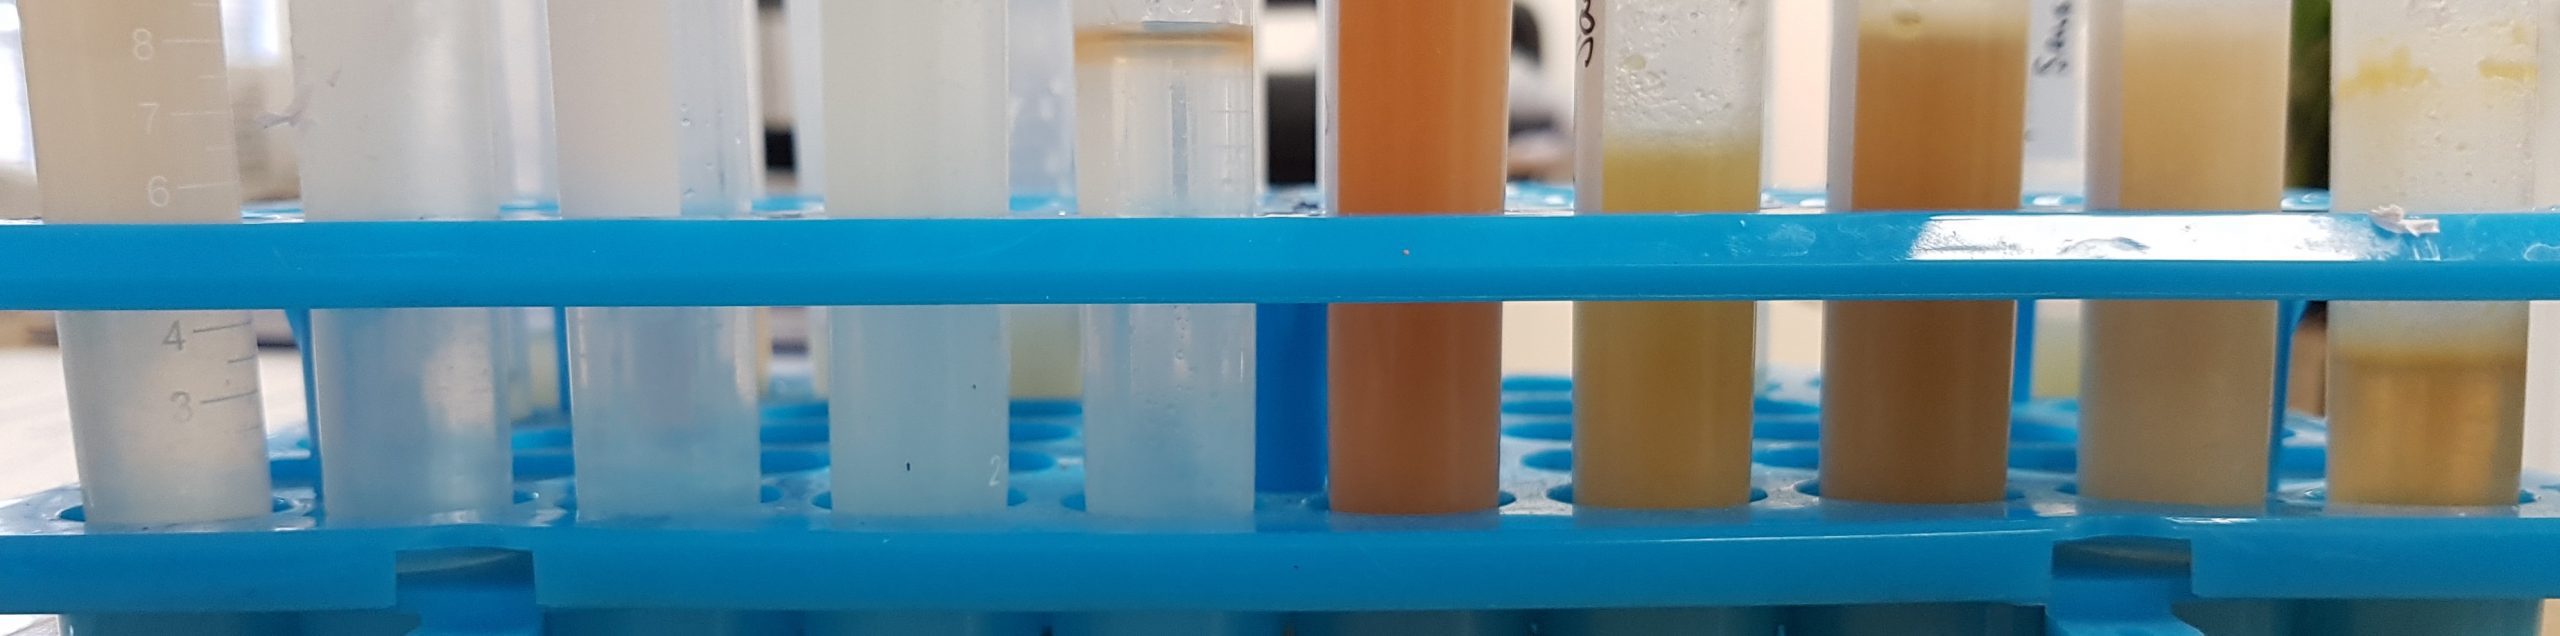 Image of samples after aqueous extraction from the alt-meat products